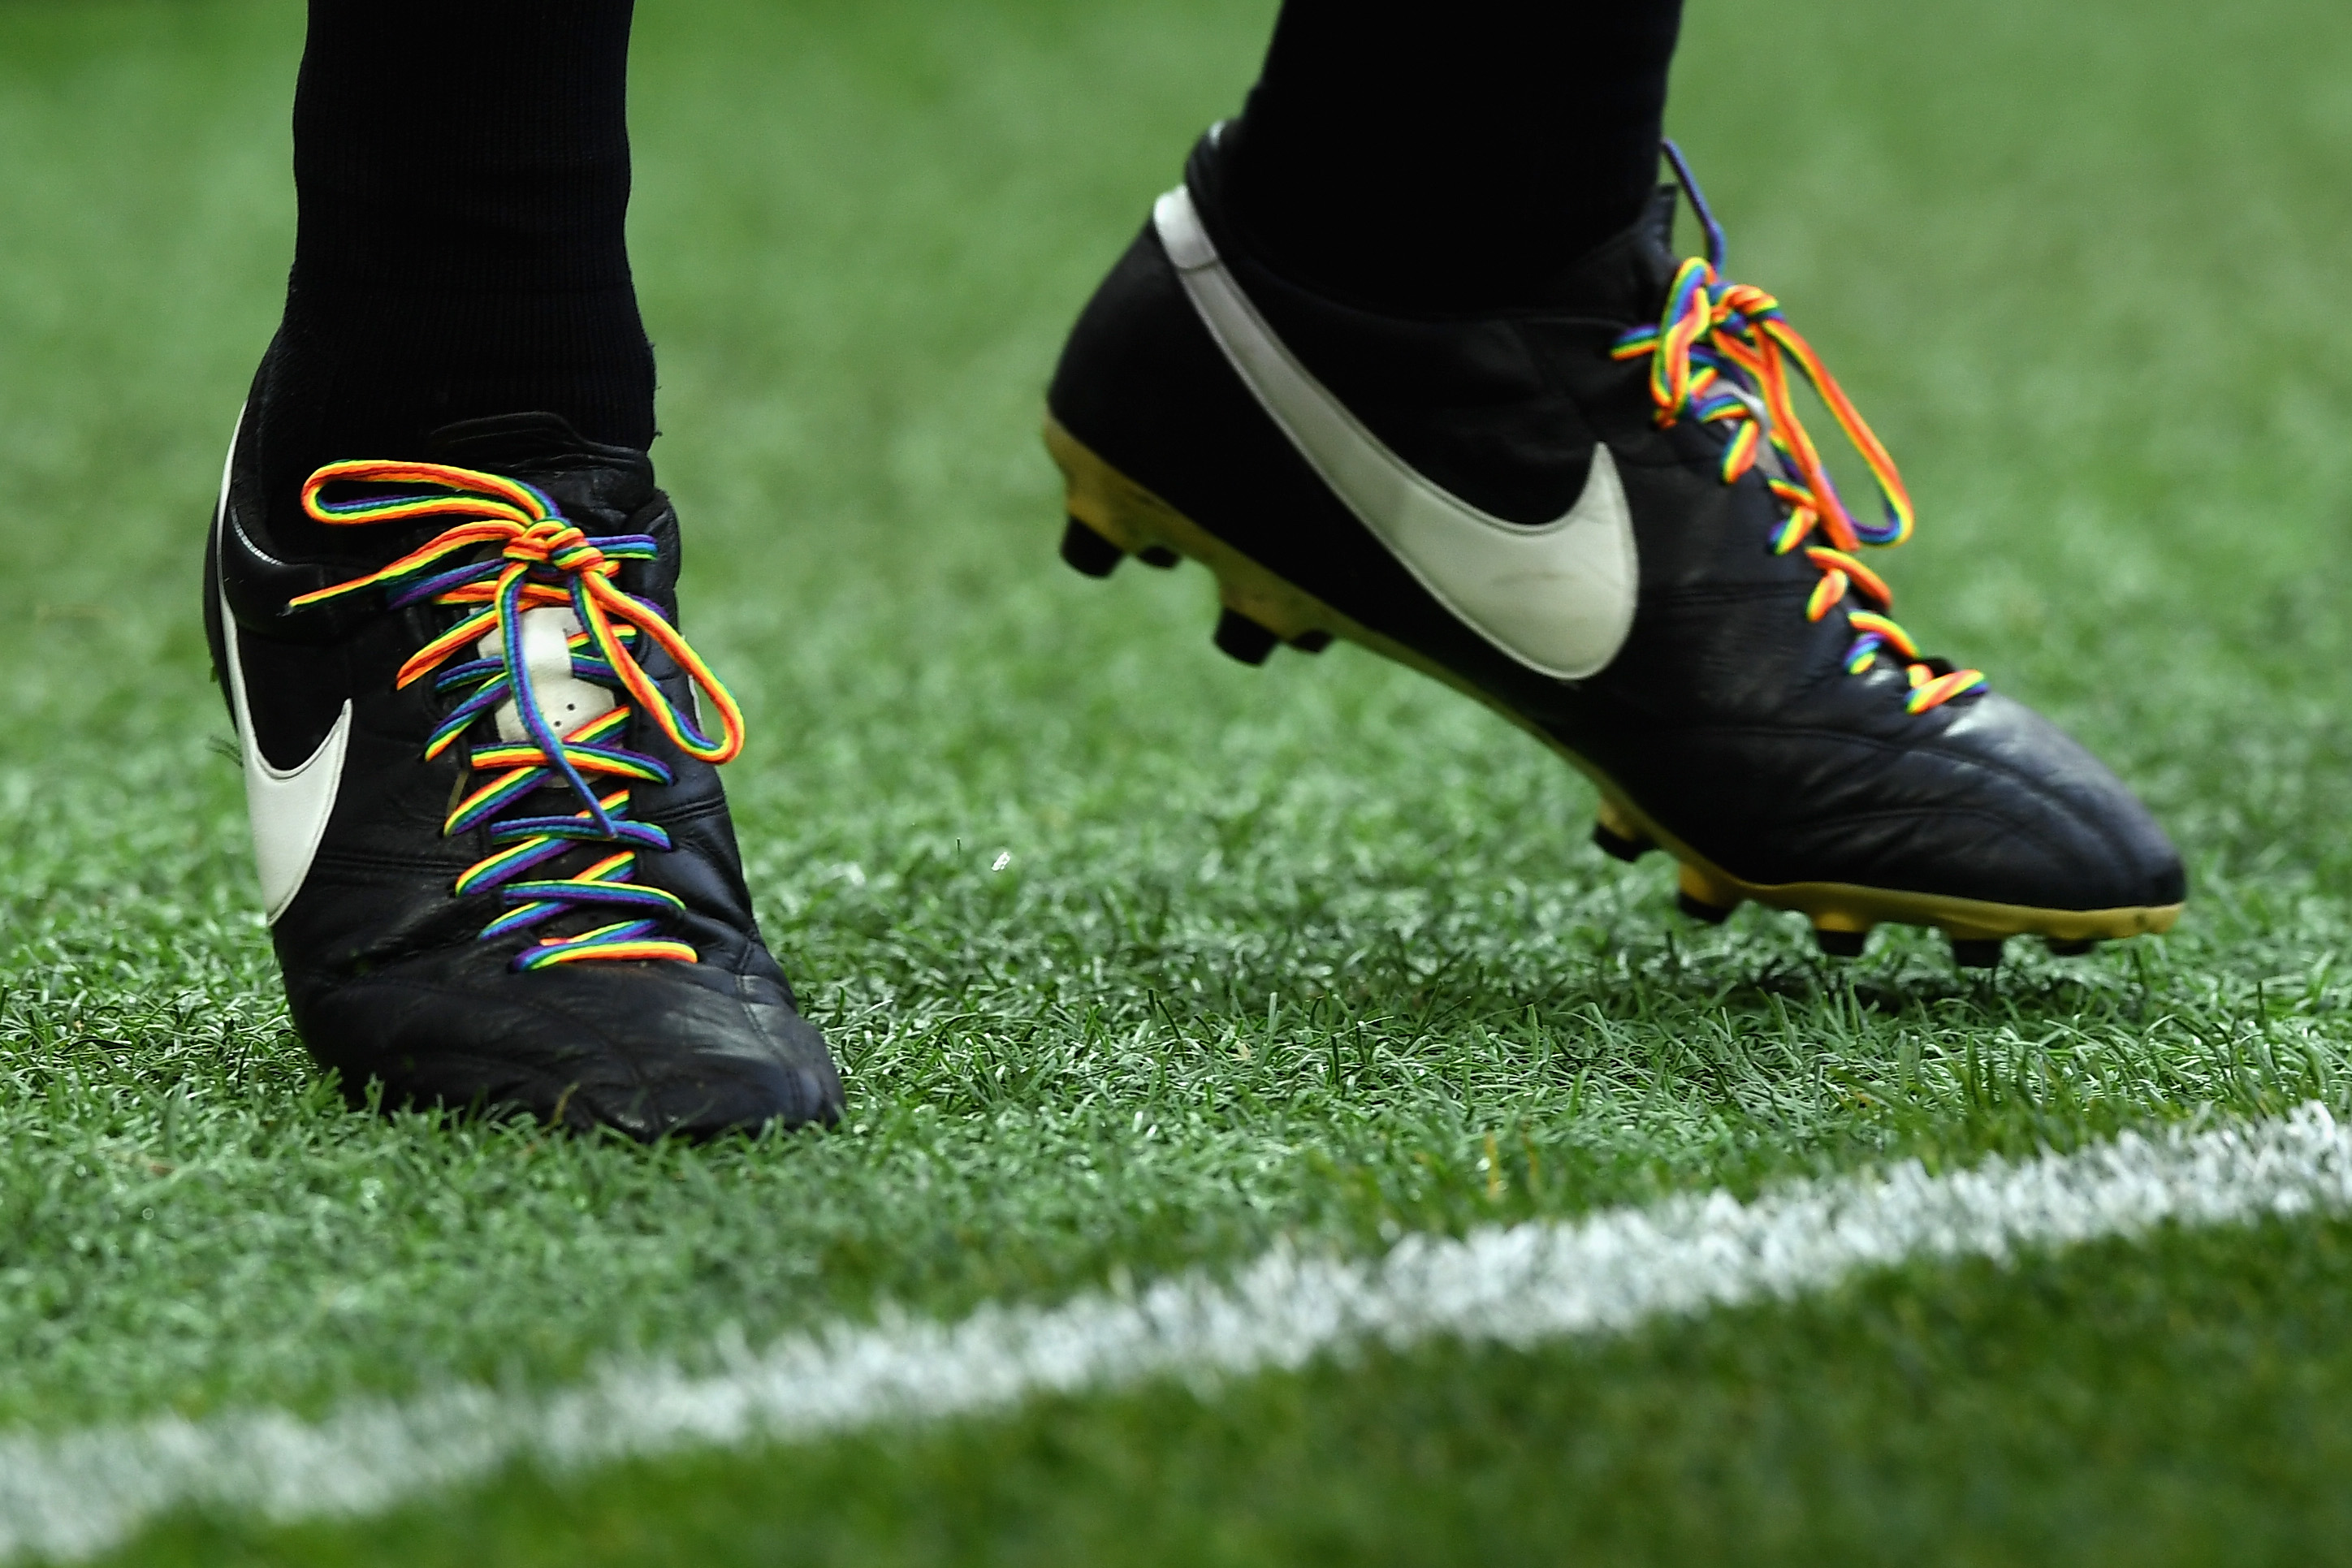 Image of football boots with rainbow laces.